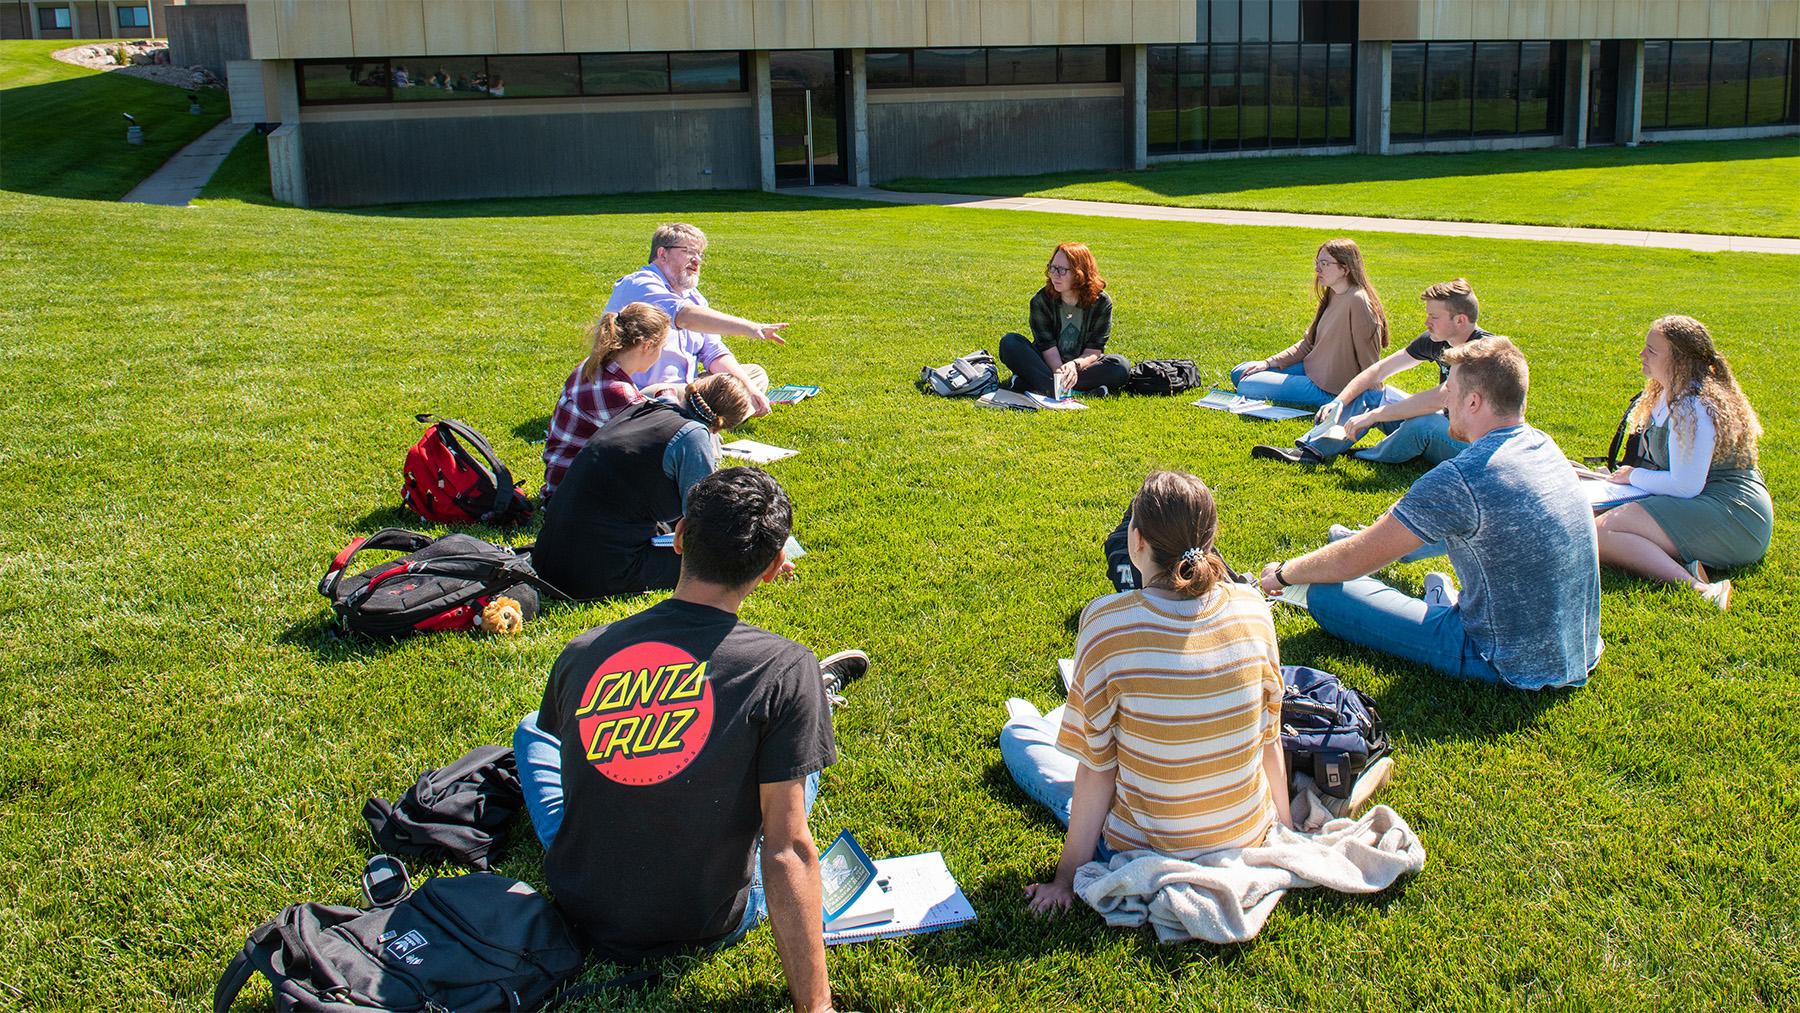 A professor teaching a class outside on the lawn.